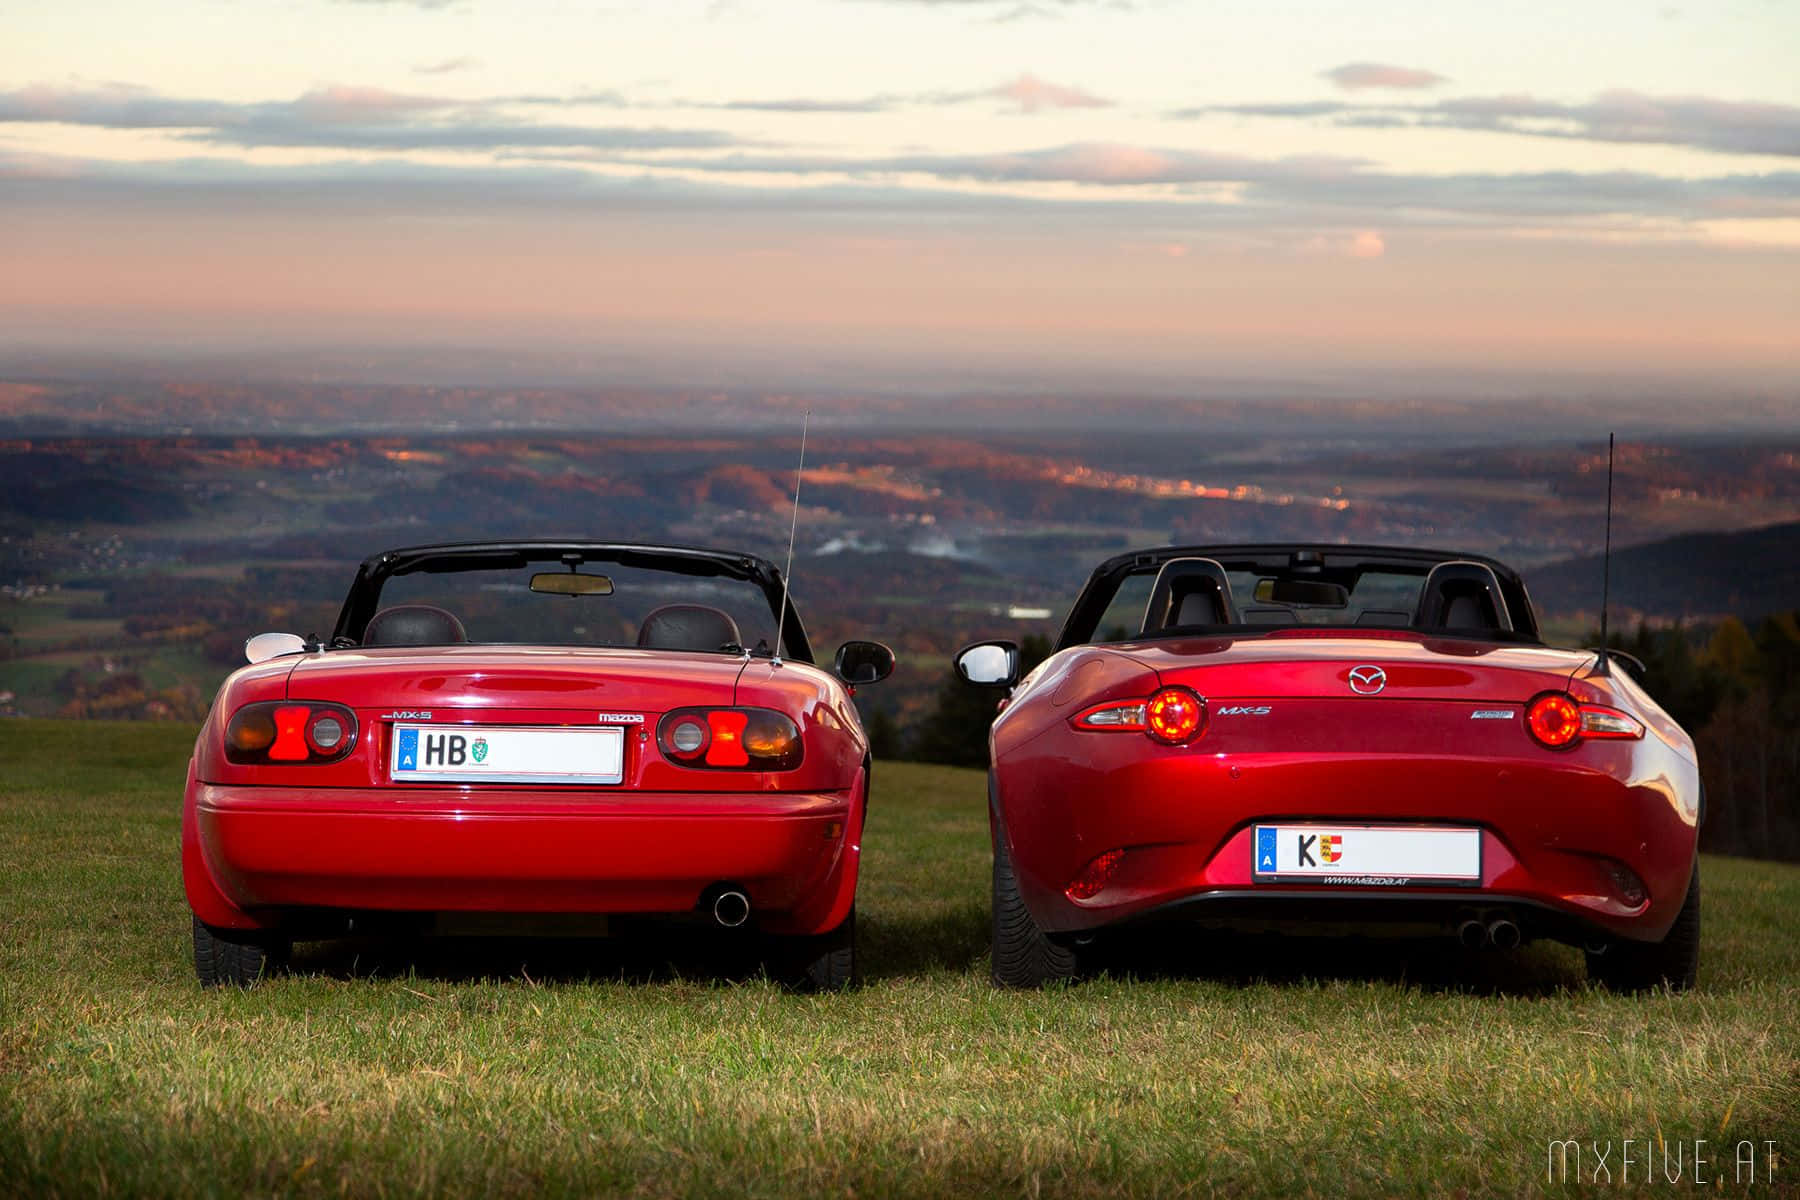 Two Red Sports Cars Parked On A Grassy Field Wallpaper